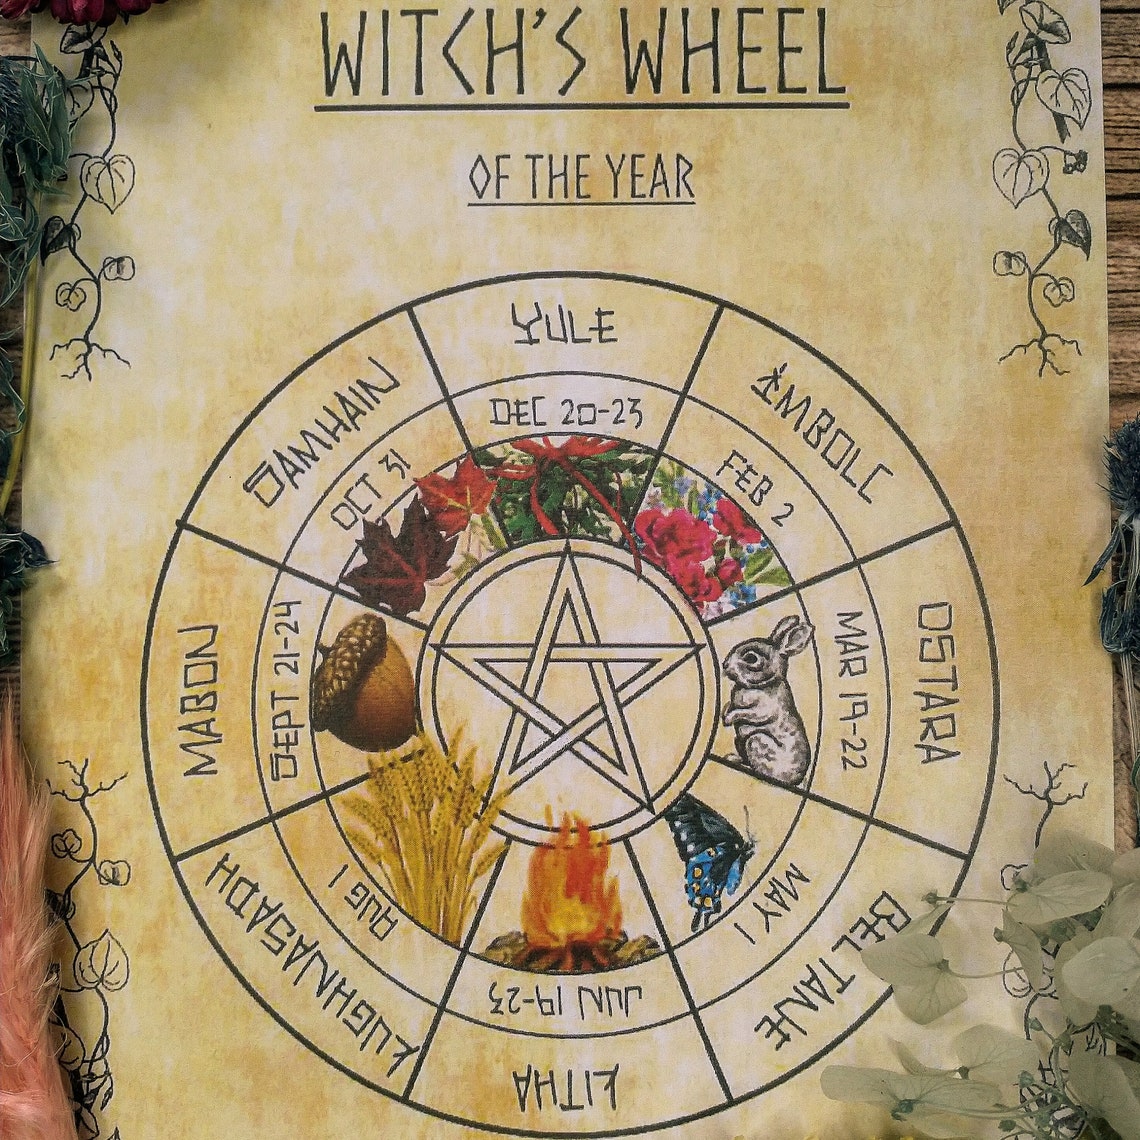 witch-wheel-of-the-year-digital-grimoire-page-book-of-etsy-uk